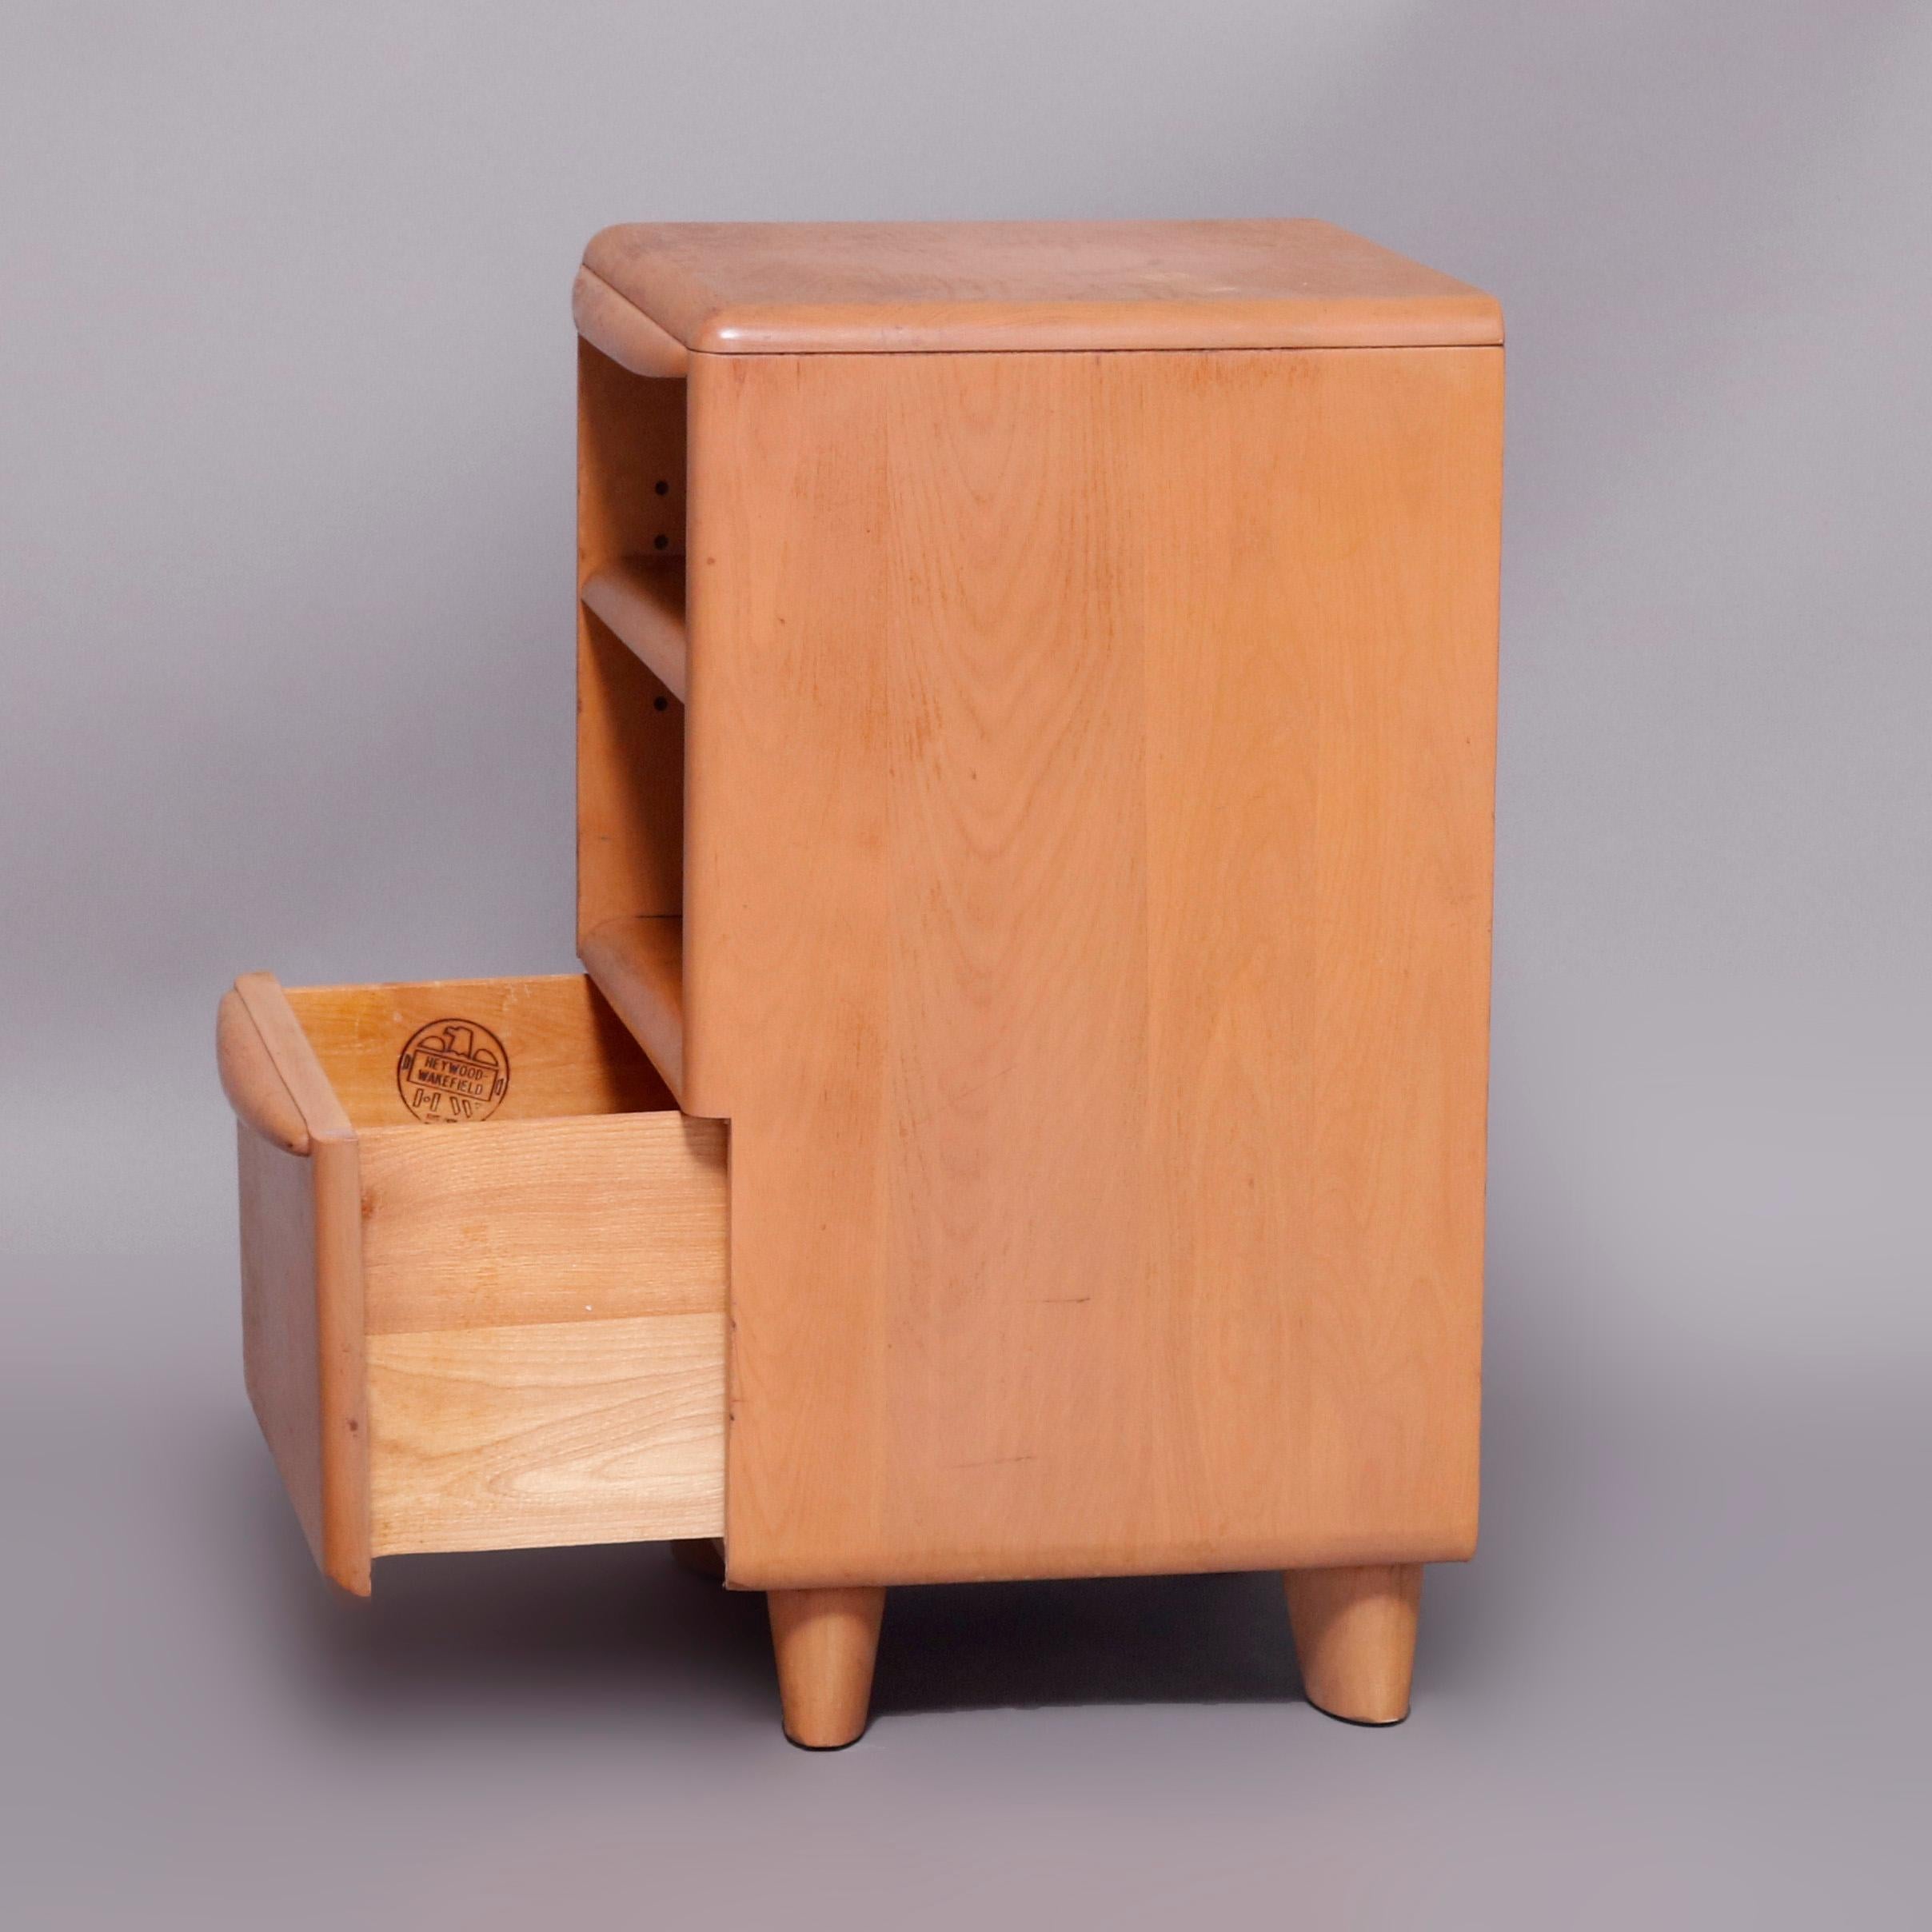 A Mid-Century Modern night stand offers birch construction in the Encore pattern having Champagne finish with shelving surmounting lower drawer, 20th century

Measures: 25.25